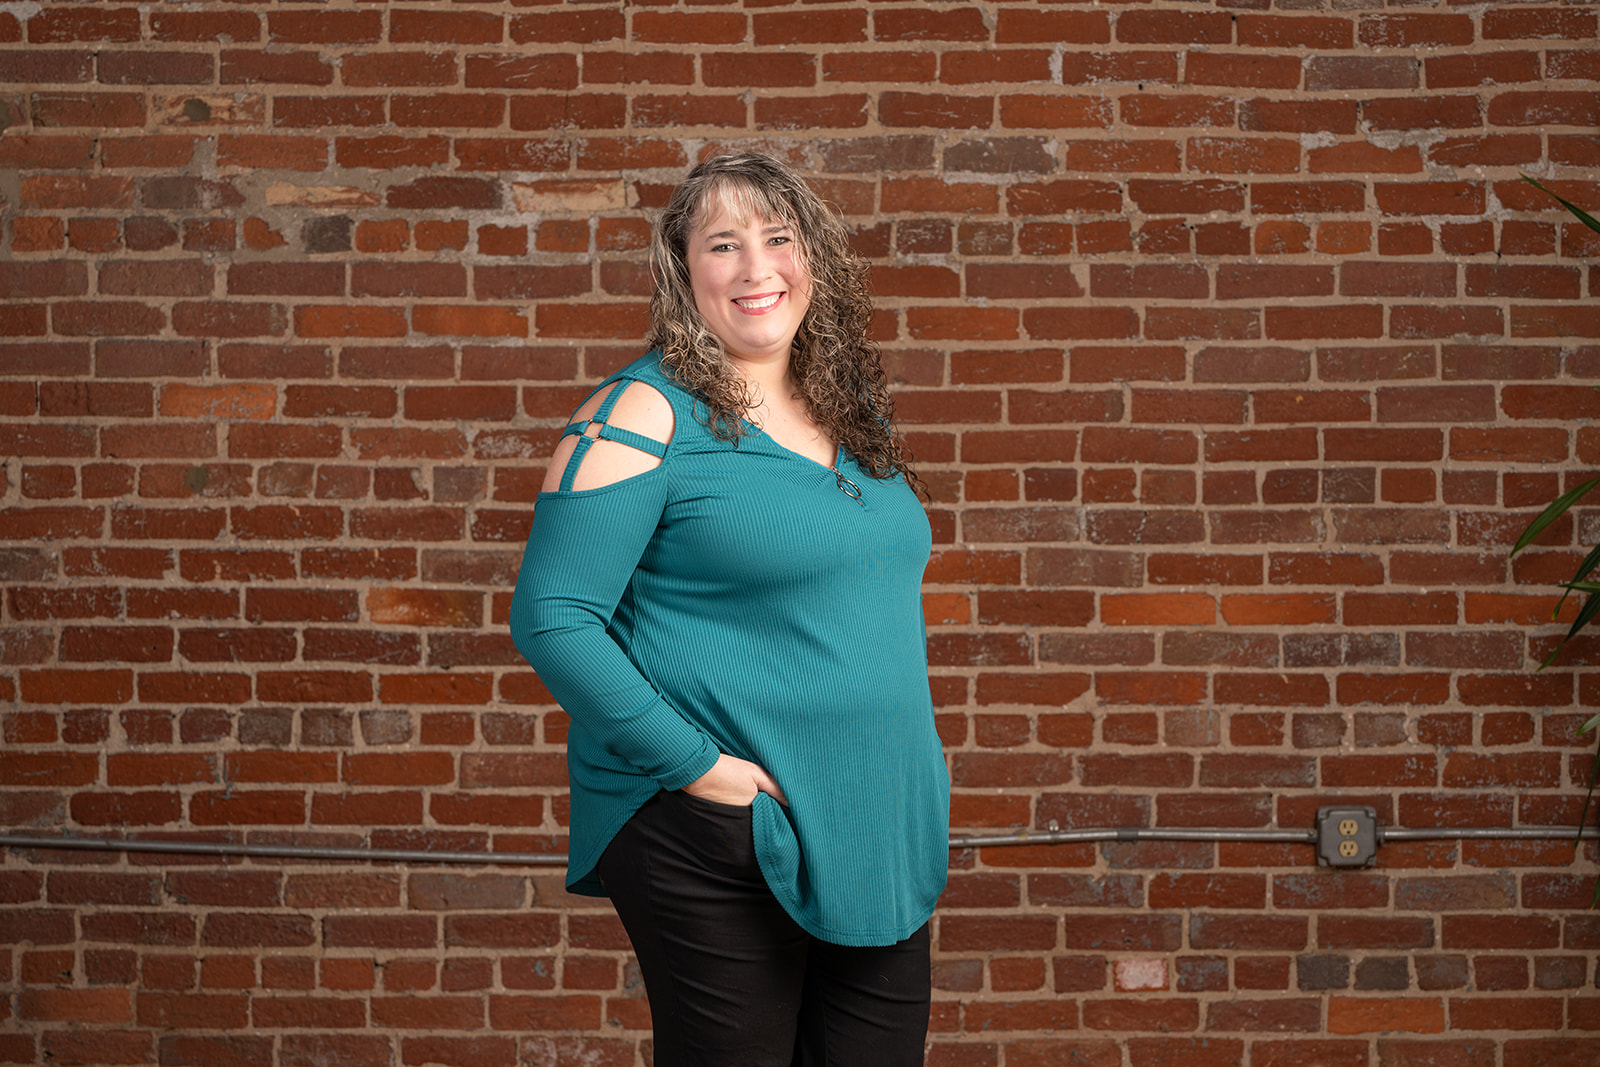 Team member Shelly, standing in front of a red brick wall.